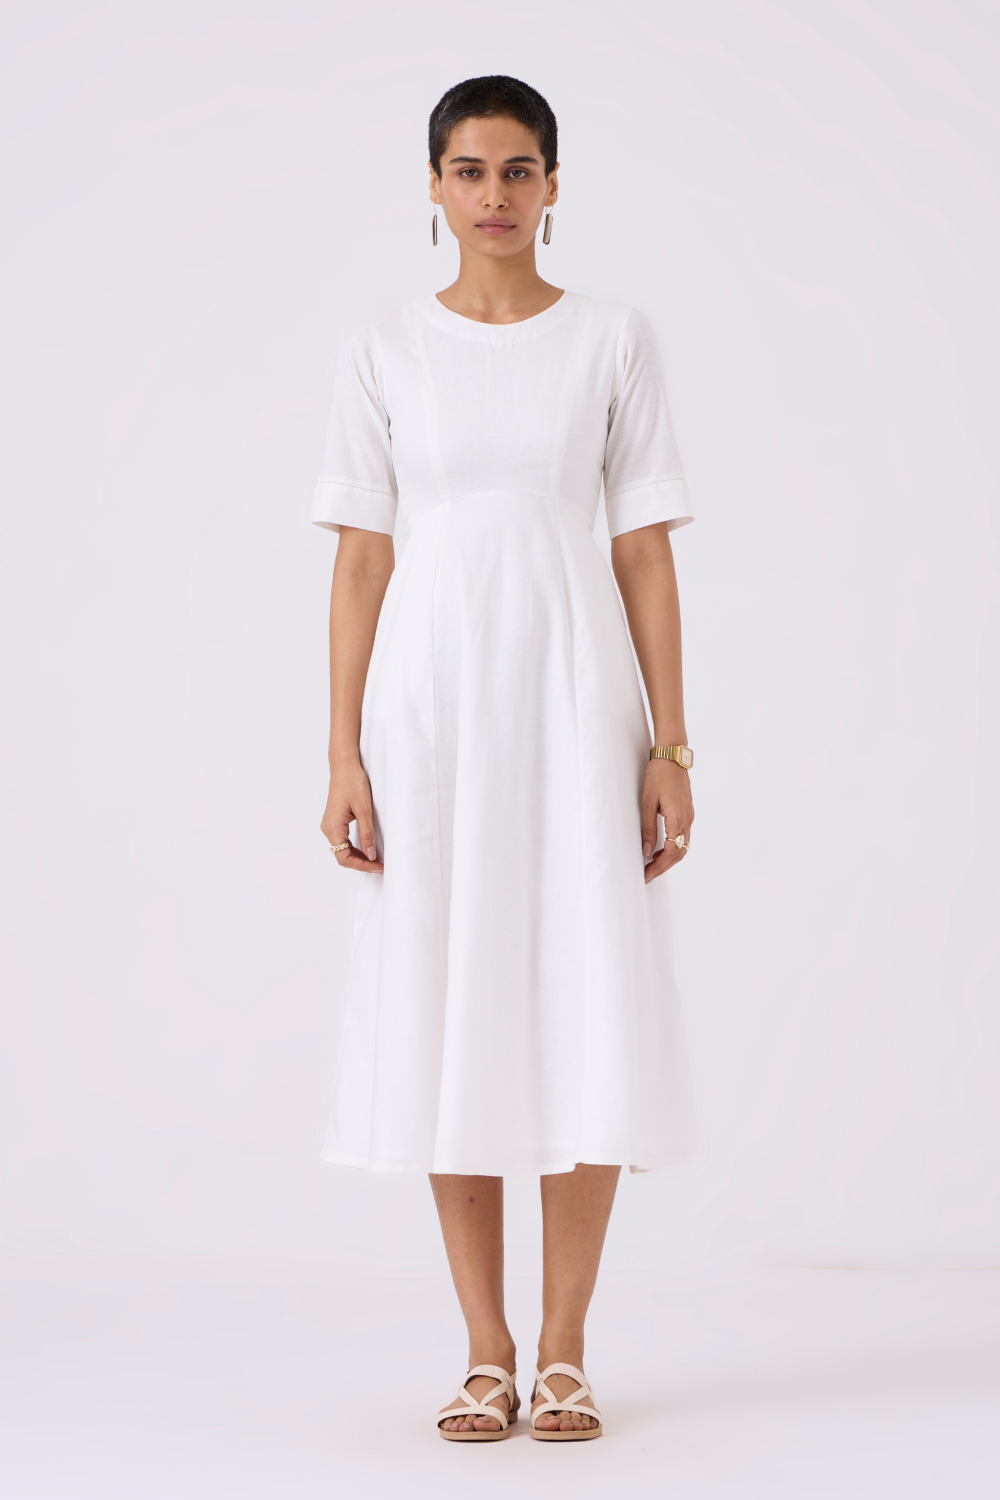 Flo White Fit & Flare Dress